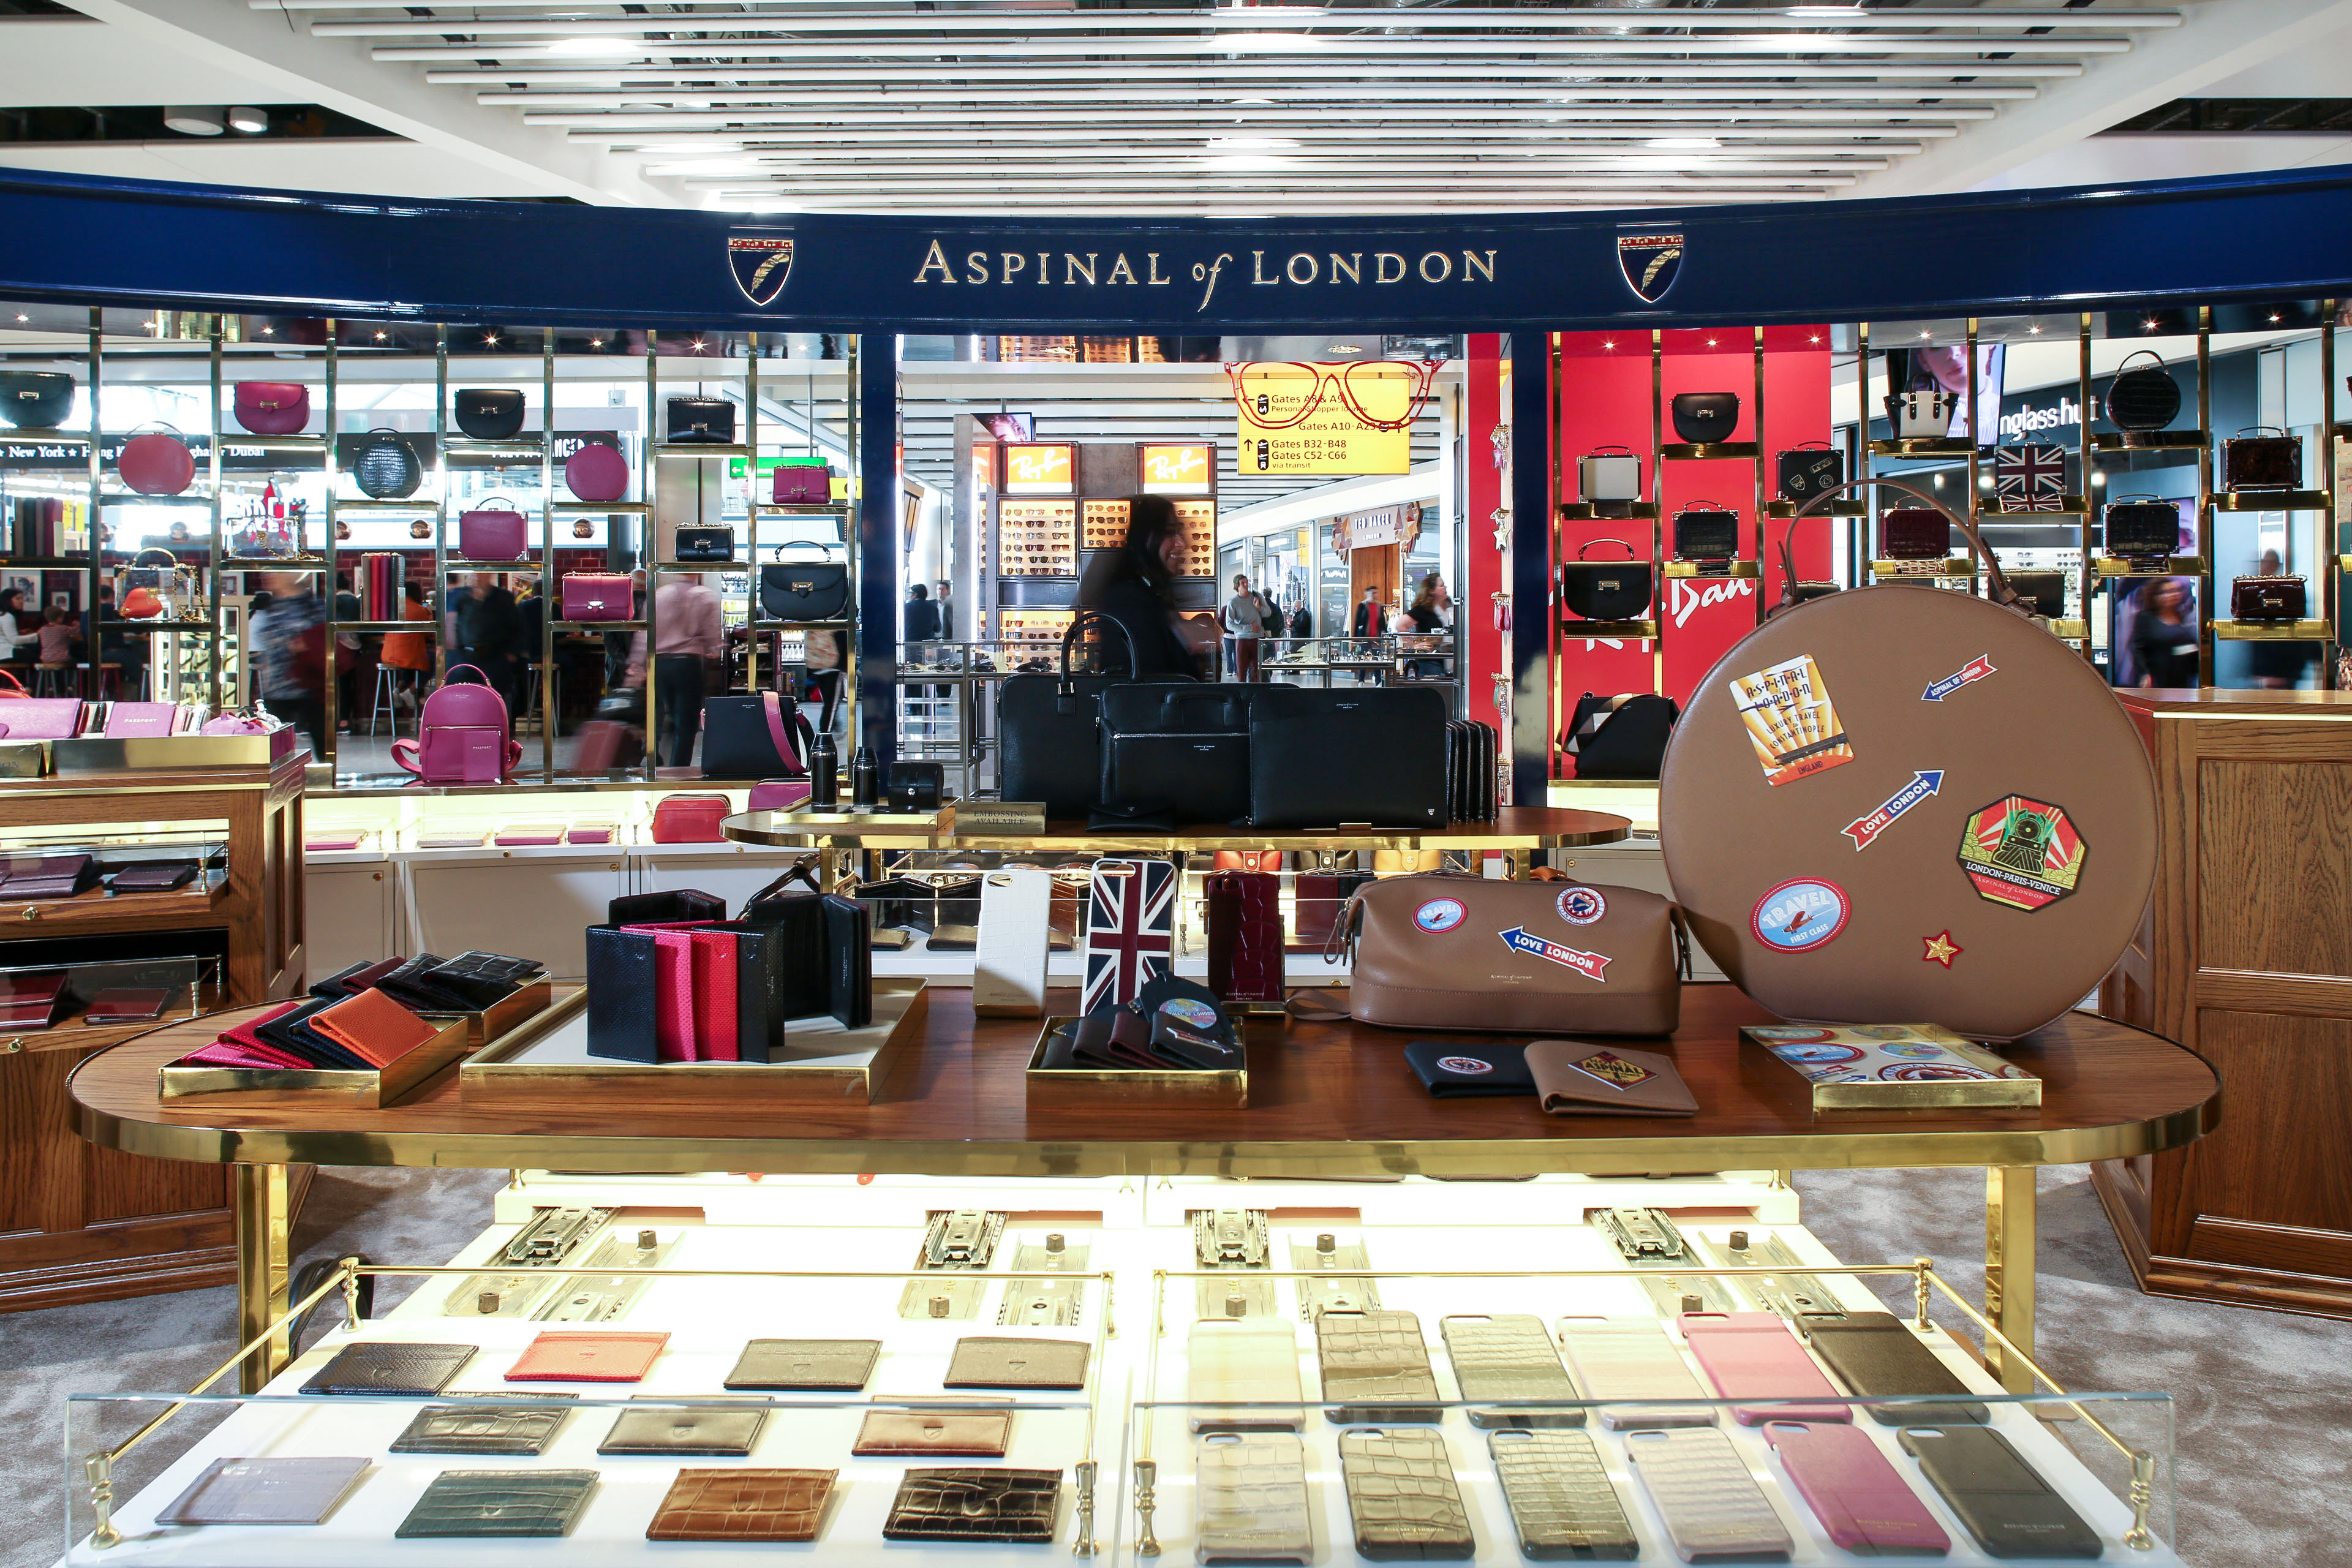 Louis Vuitton Heathrow T5 - Leather Goods And Travel Items (Retail) in  Hounslow (address, schedule, reviews, TEL: 02079986) - Infobel